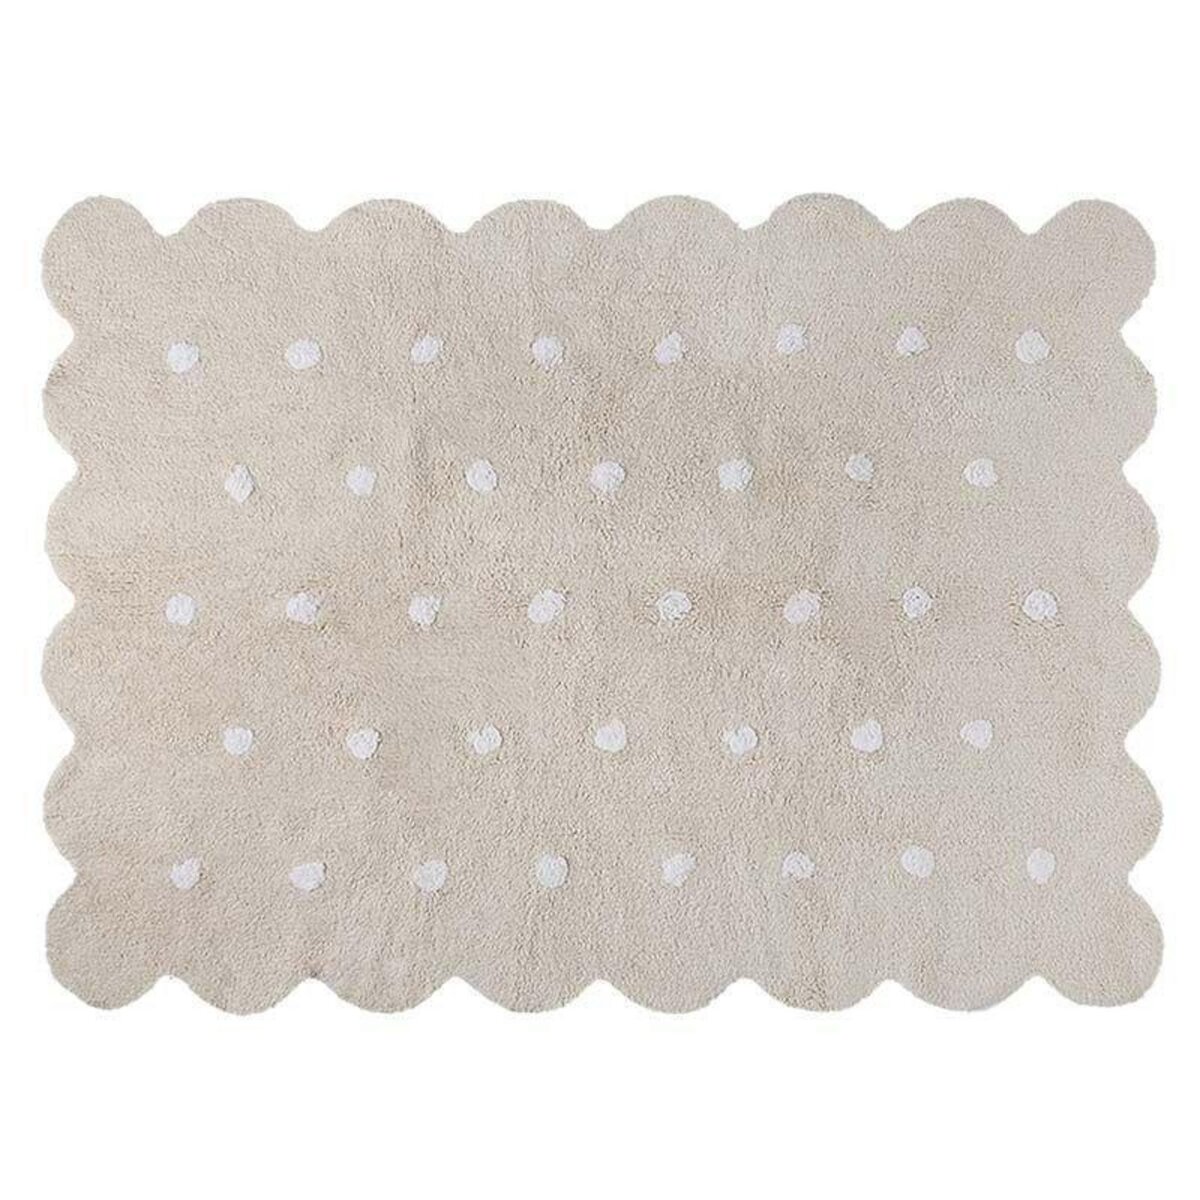 Lorena Canals Tapis coton forme biscuit - beige - 120 x 160